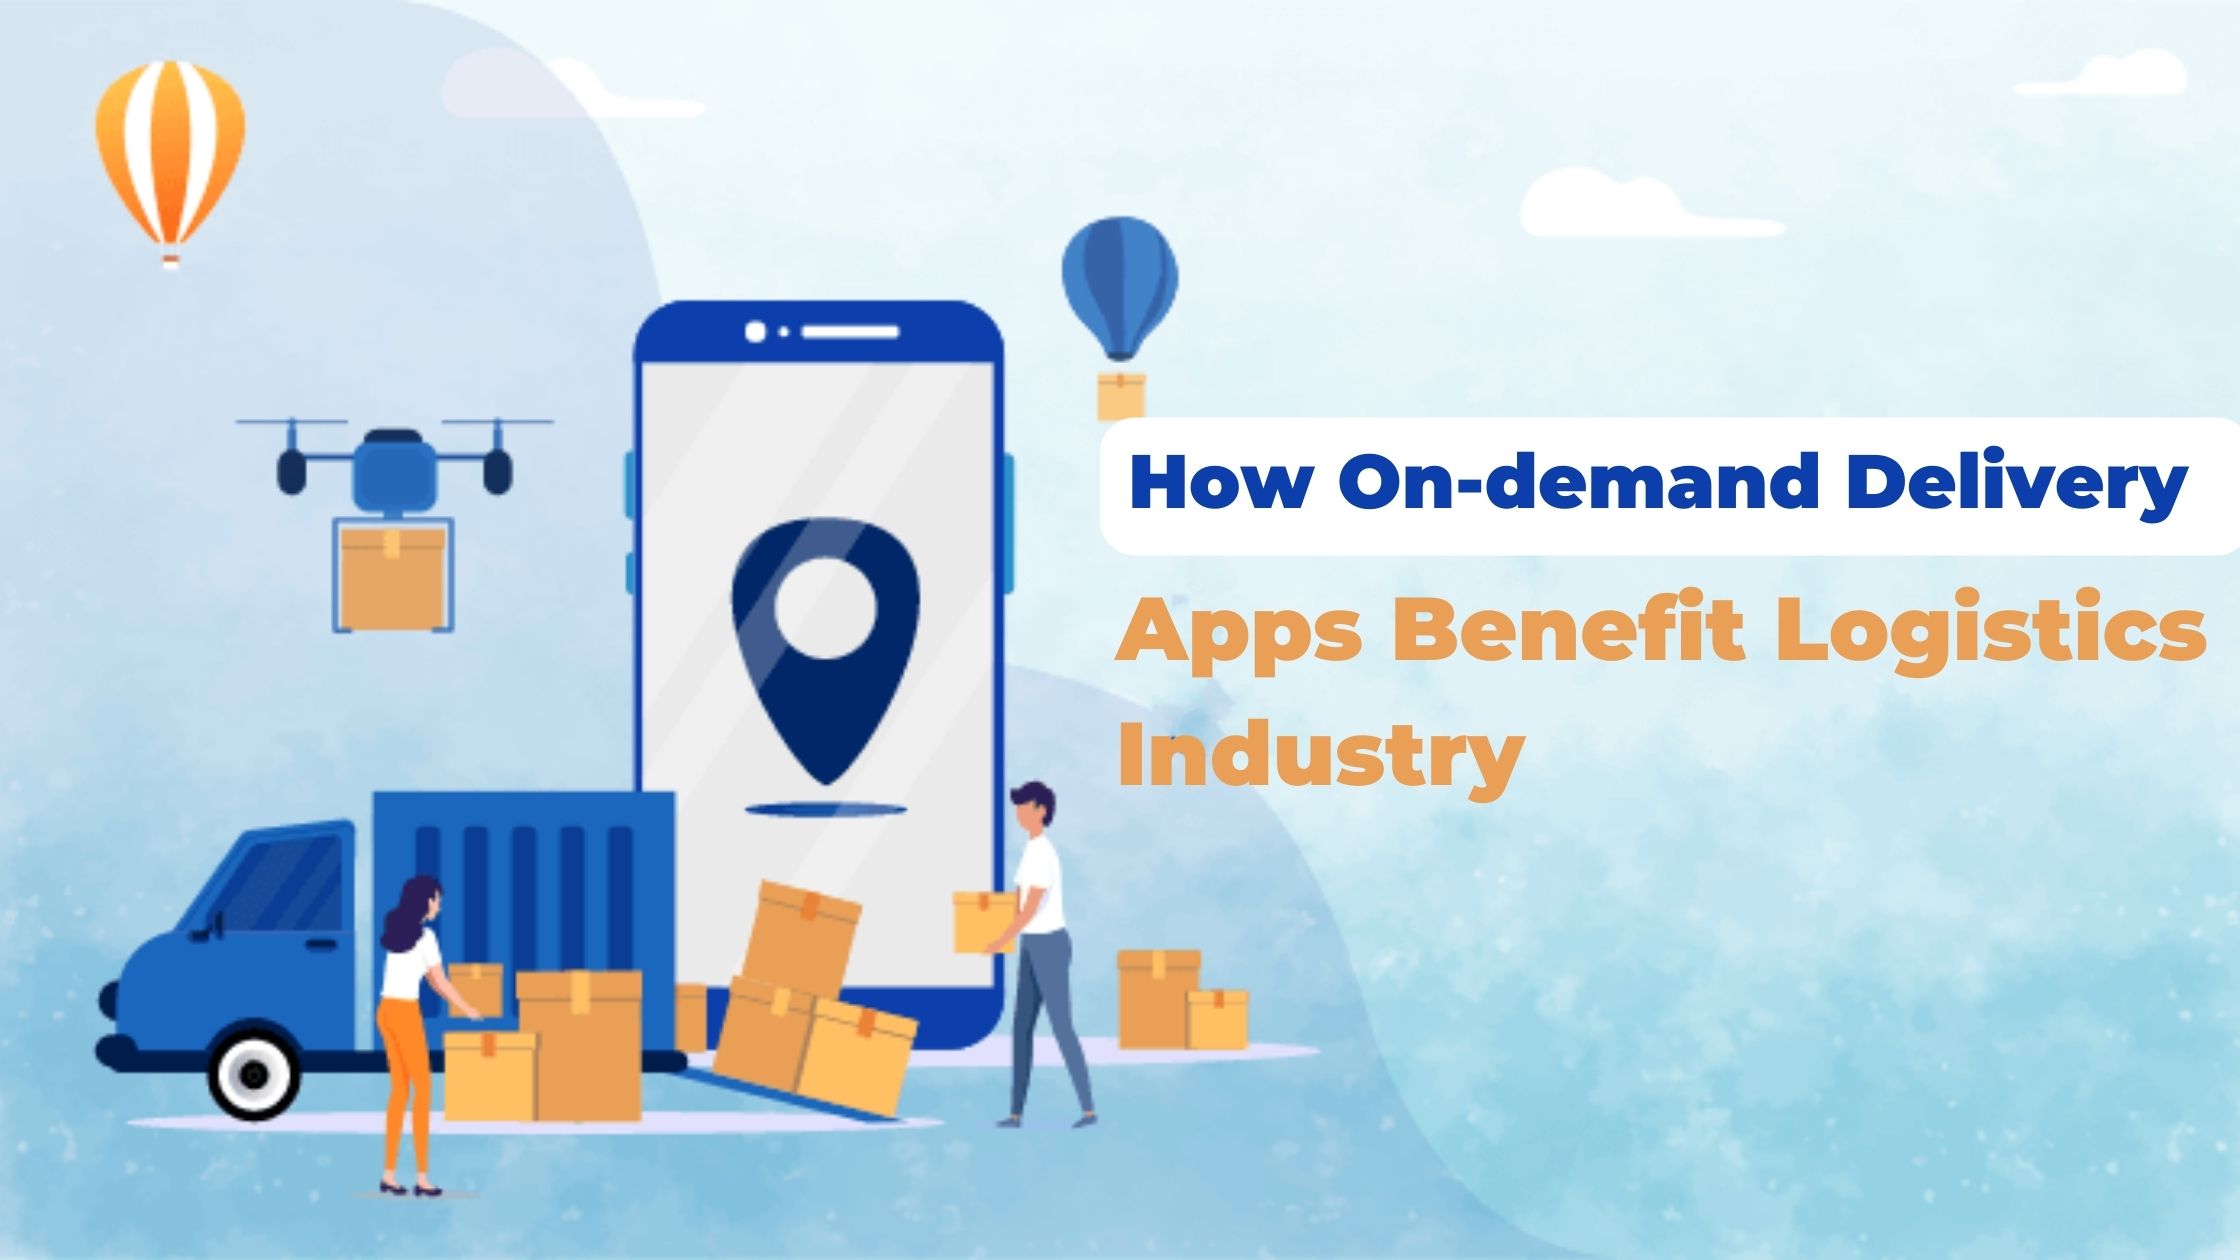 How On-demand Delivery Apps Benefit Logistics Industry